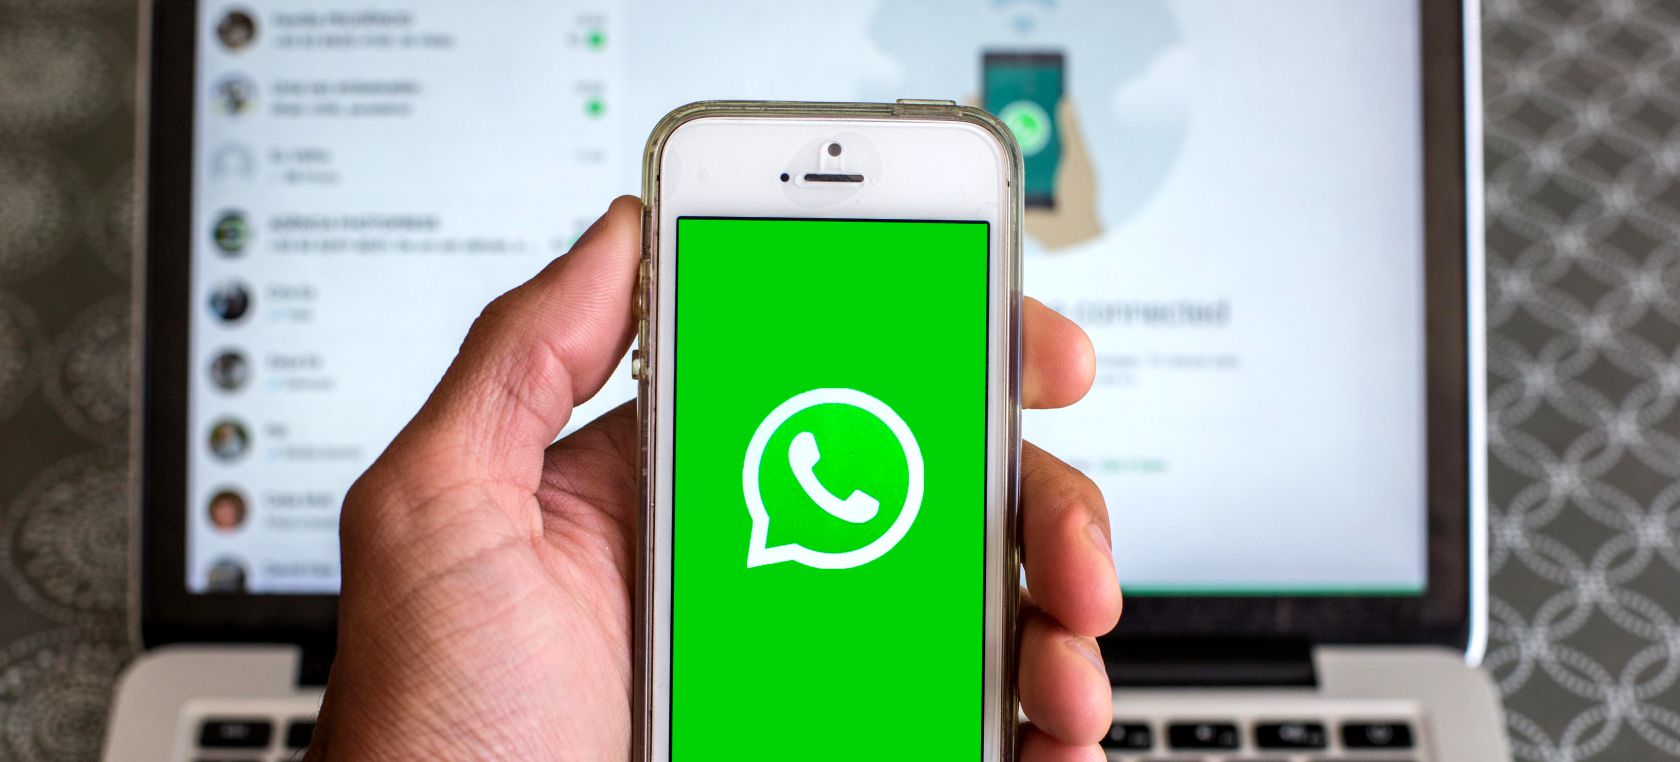 WhatsApp lets you hide your “online” presence